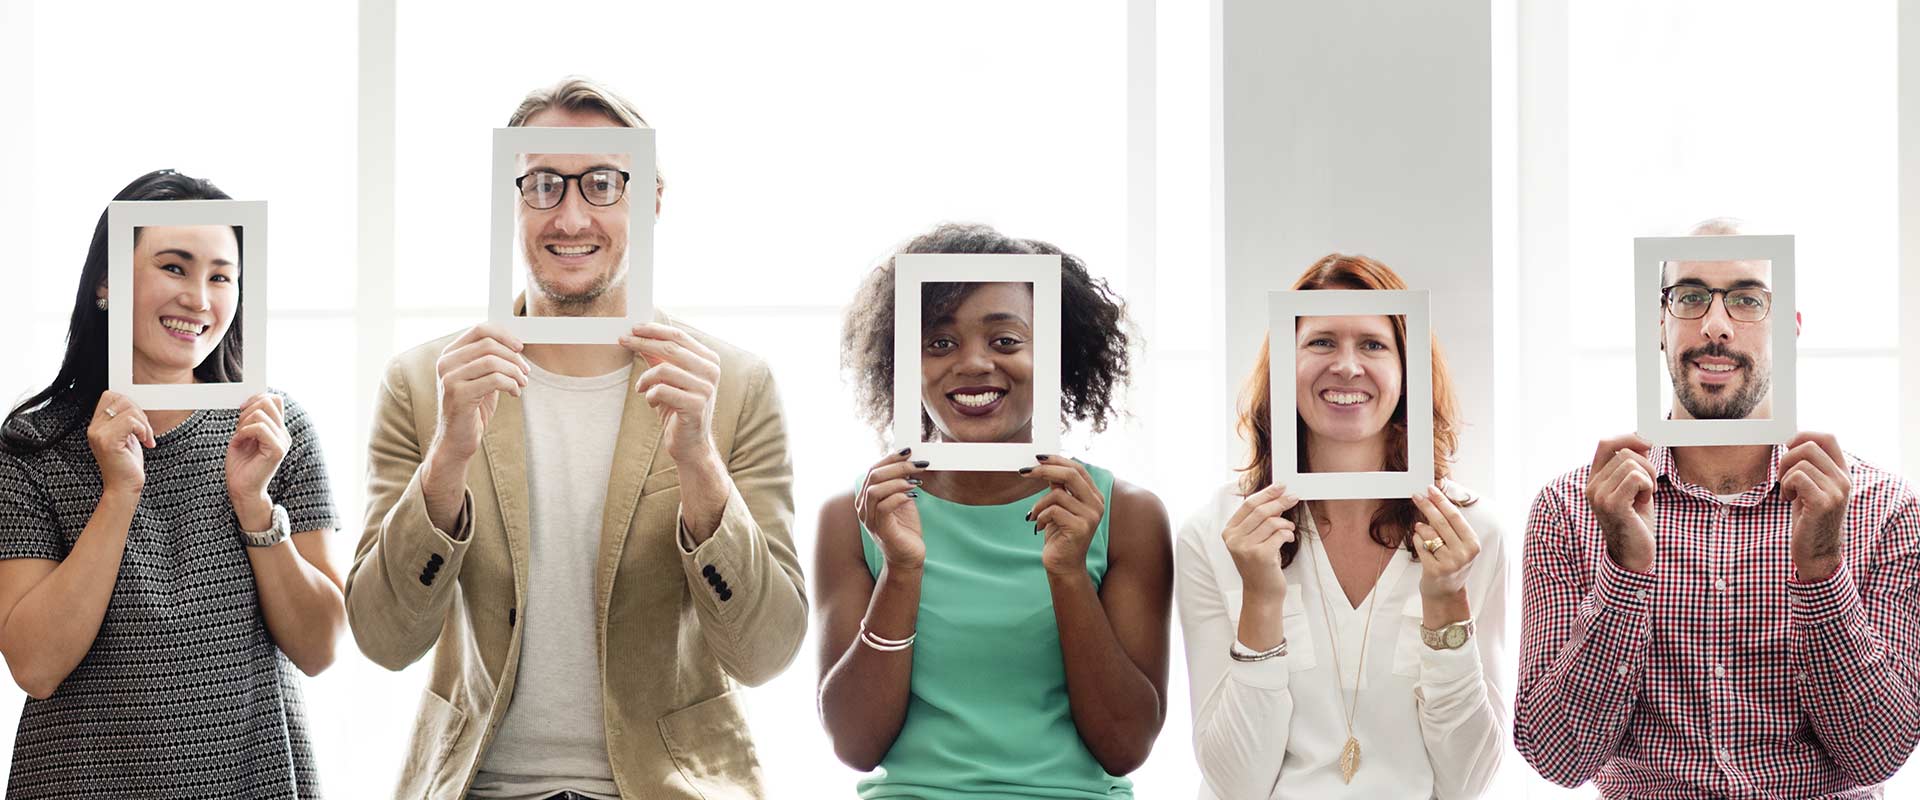 Picture of a diverse group of people holding up an empty picture frame to their faces so you can see their faces behind them